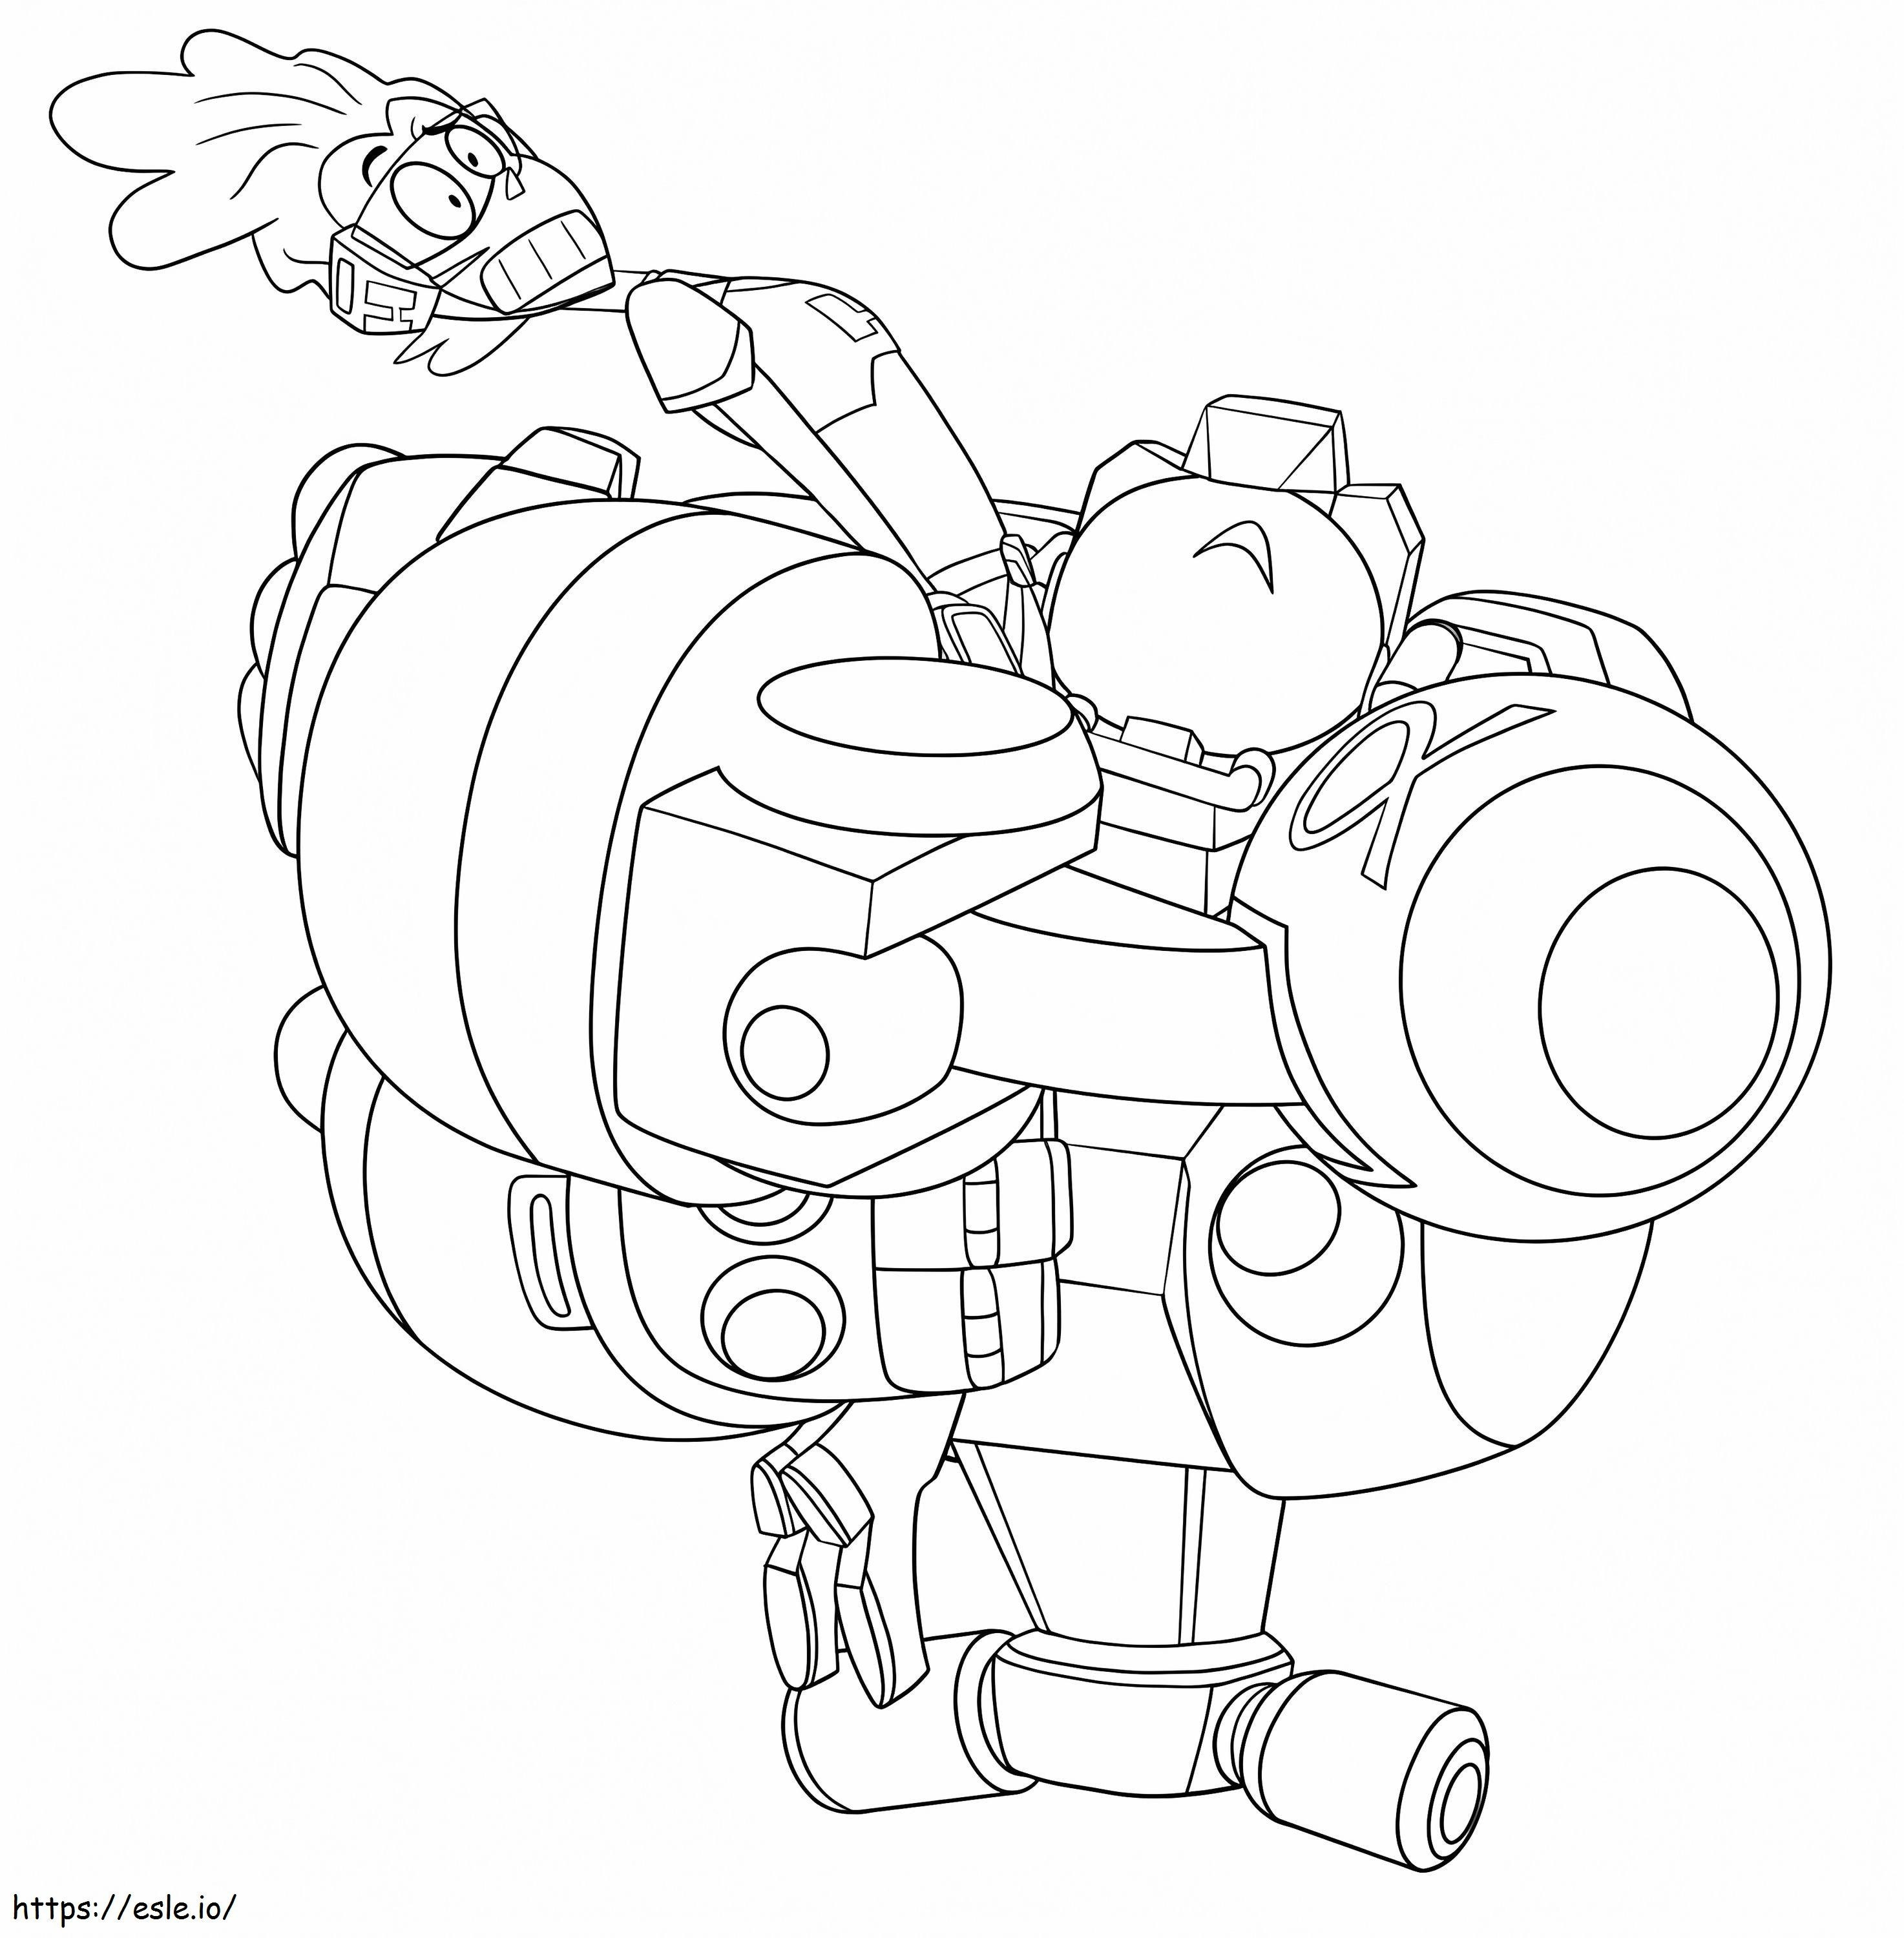 Alpha And High Five coloring page